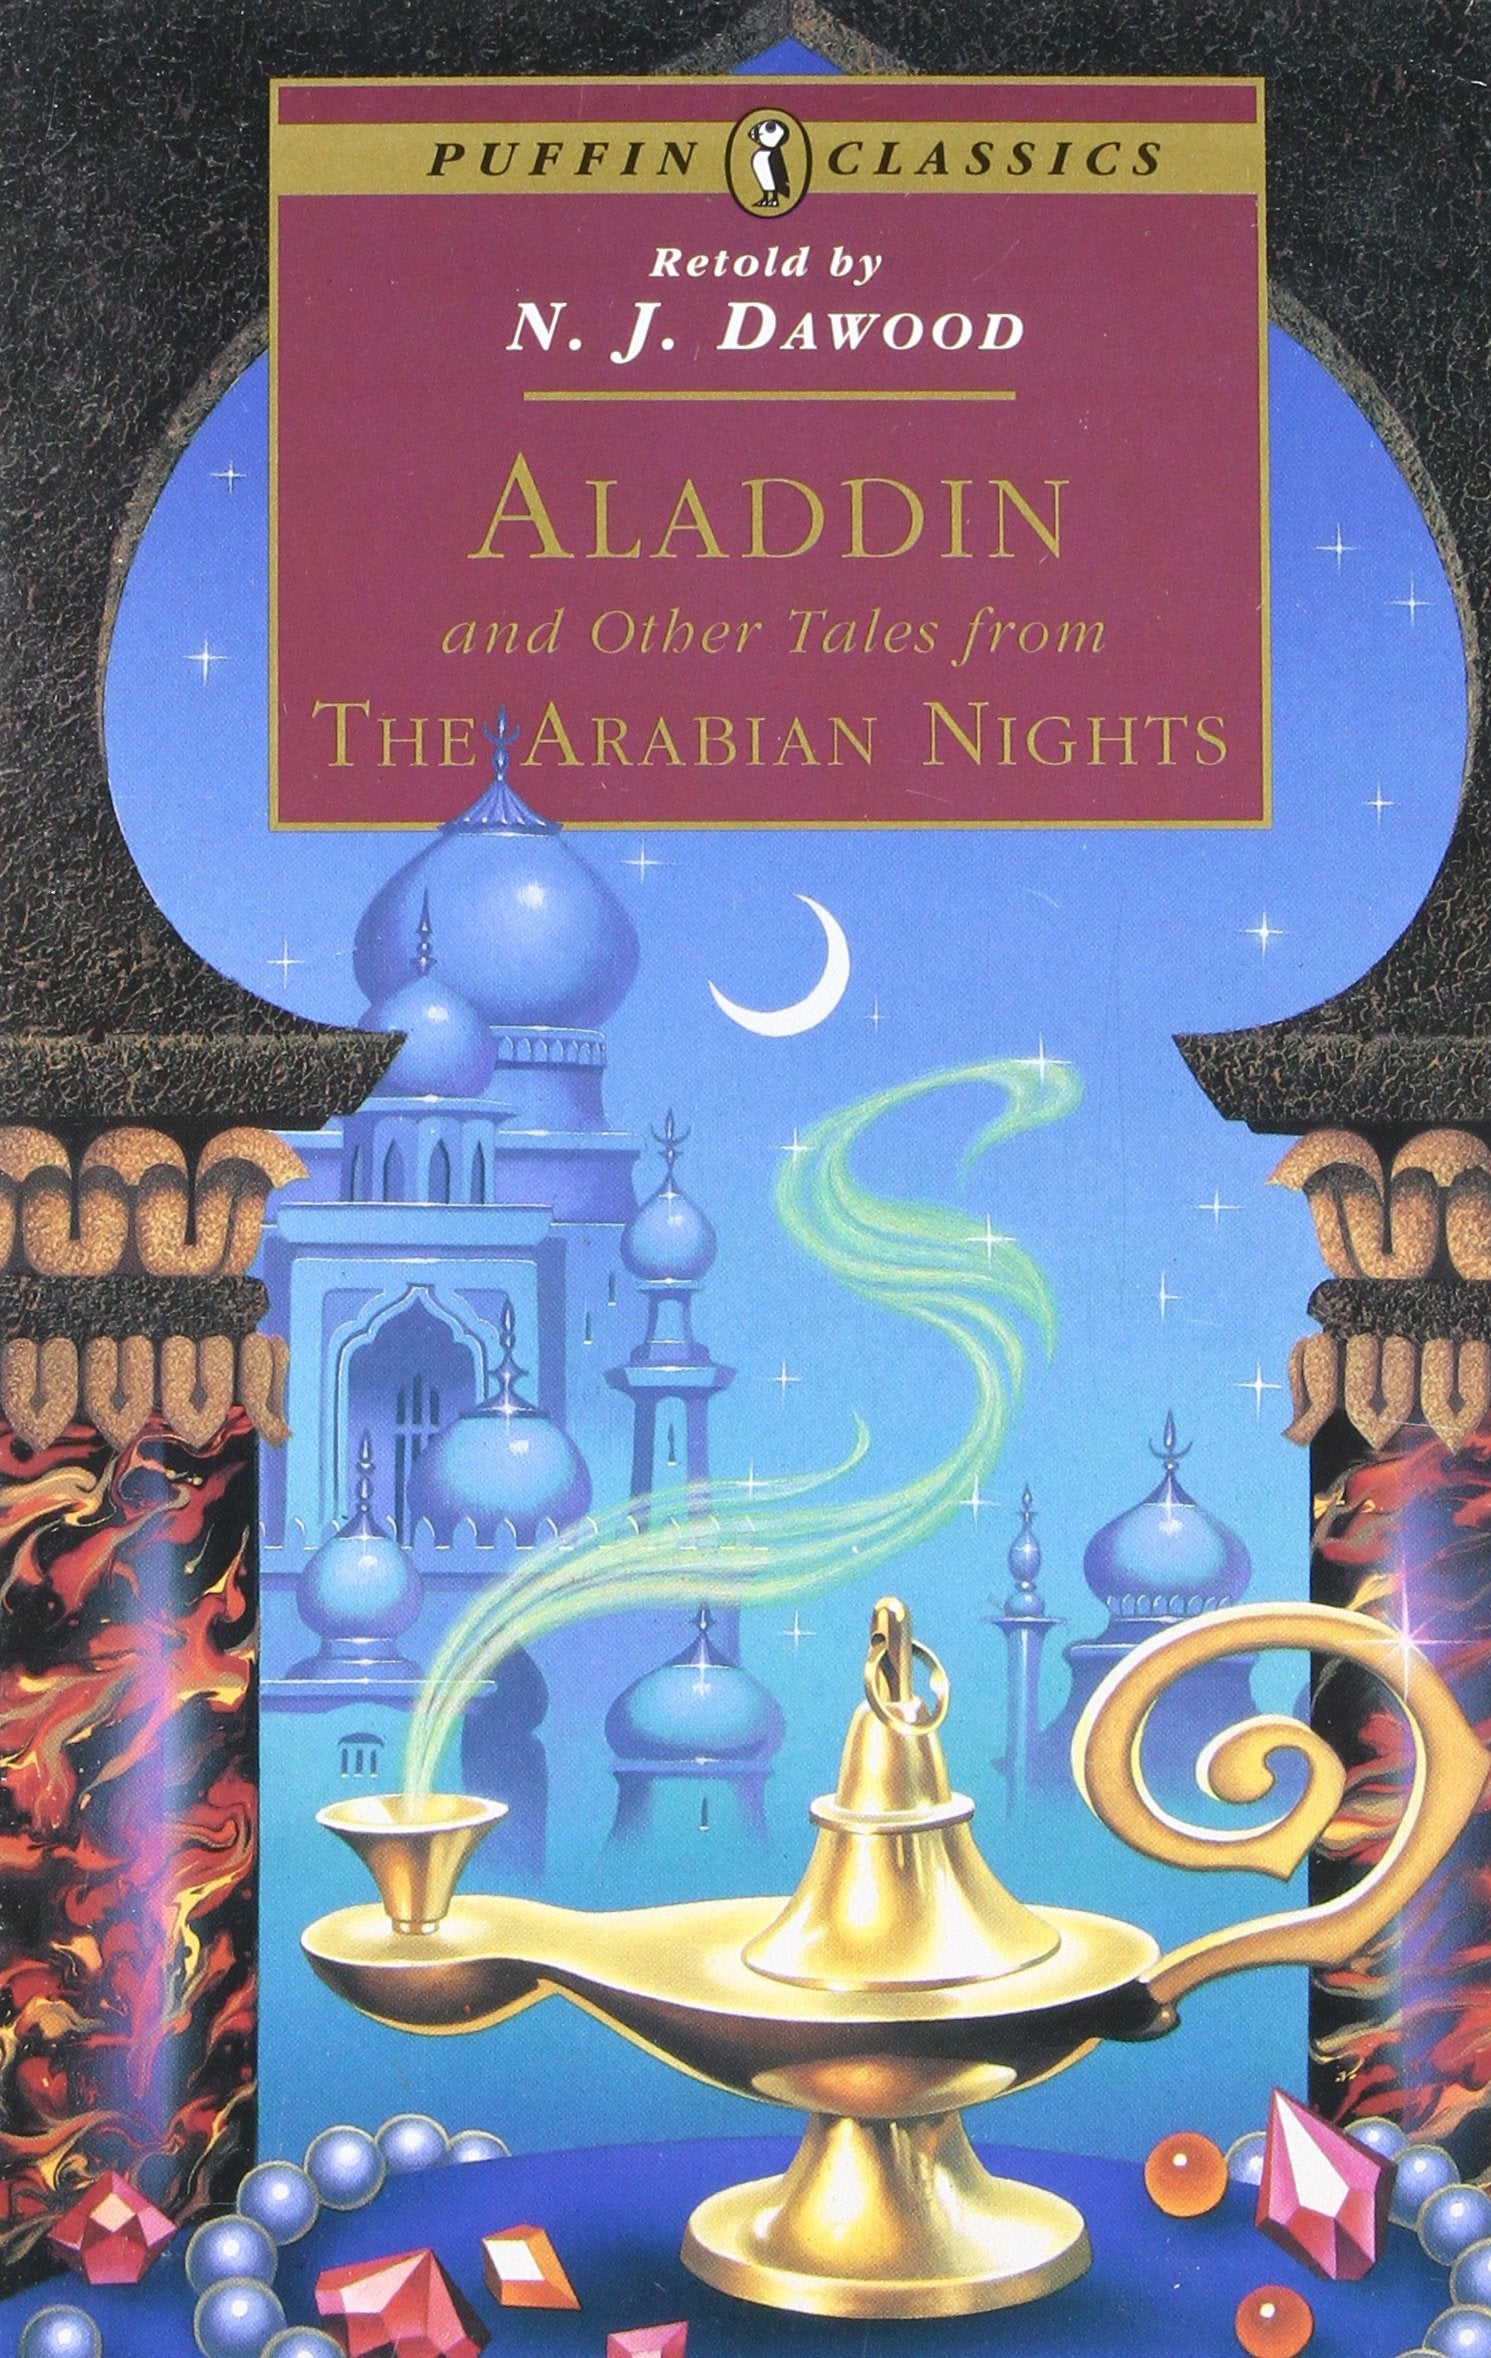 Aladdin and other tales from Arabian Nights